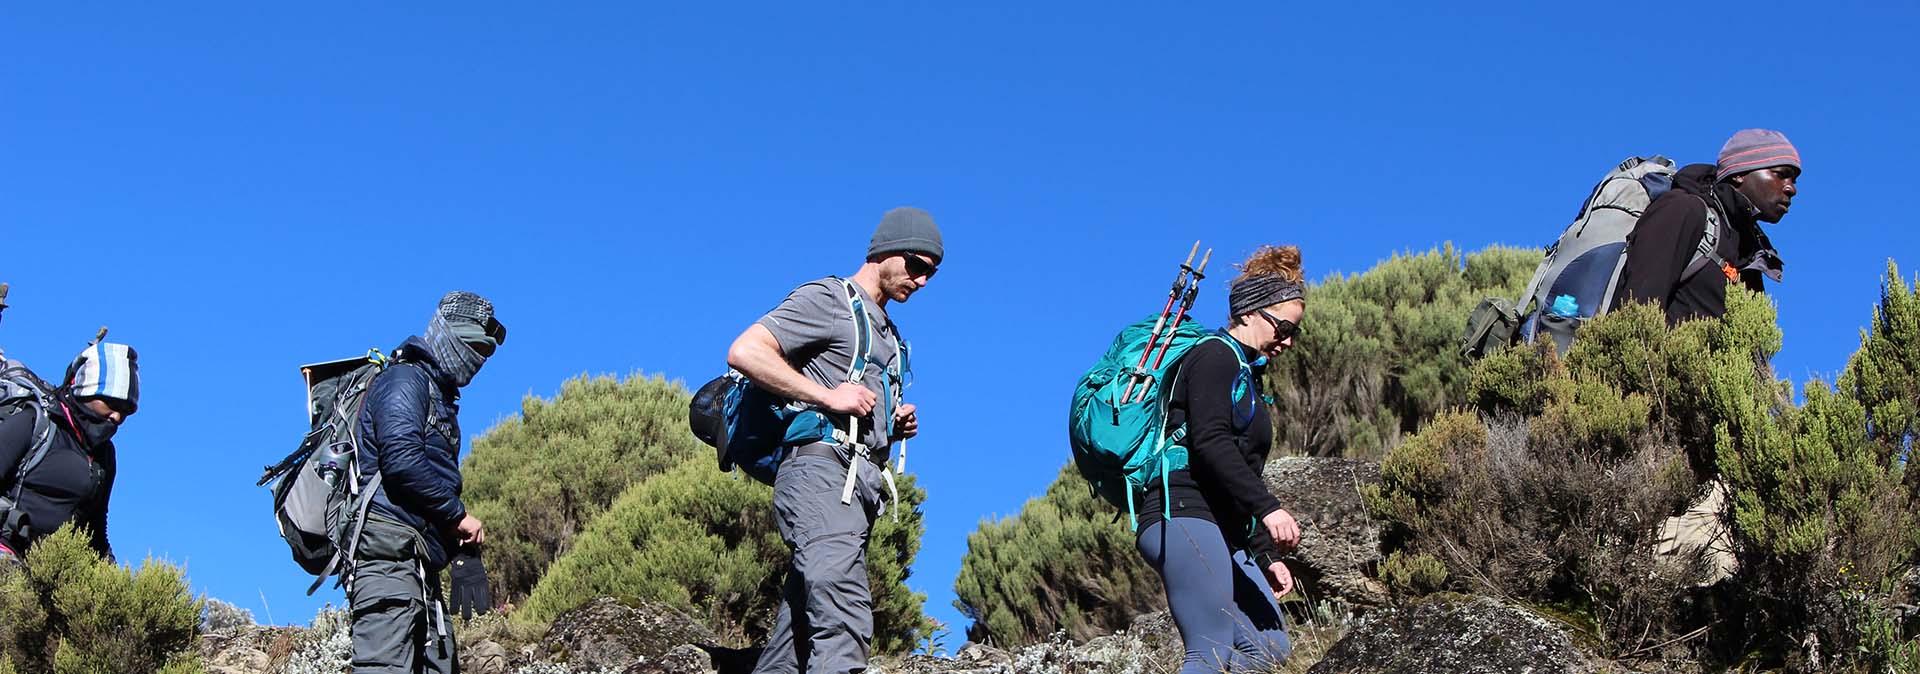 Mount Kilimanjaro Climb 6 Days Rongai Route, Rongai route is the only route starting on the northern slope of Kilimanjaro.